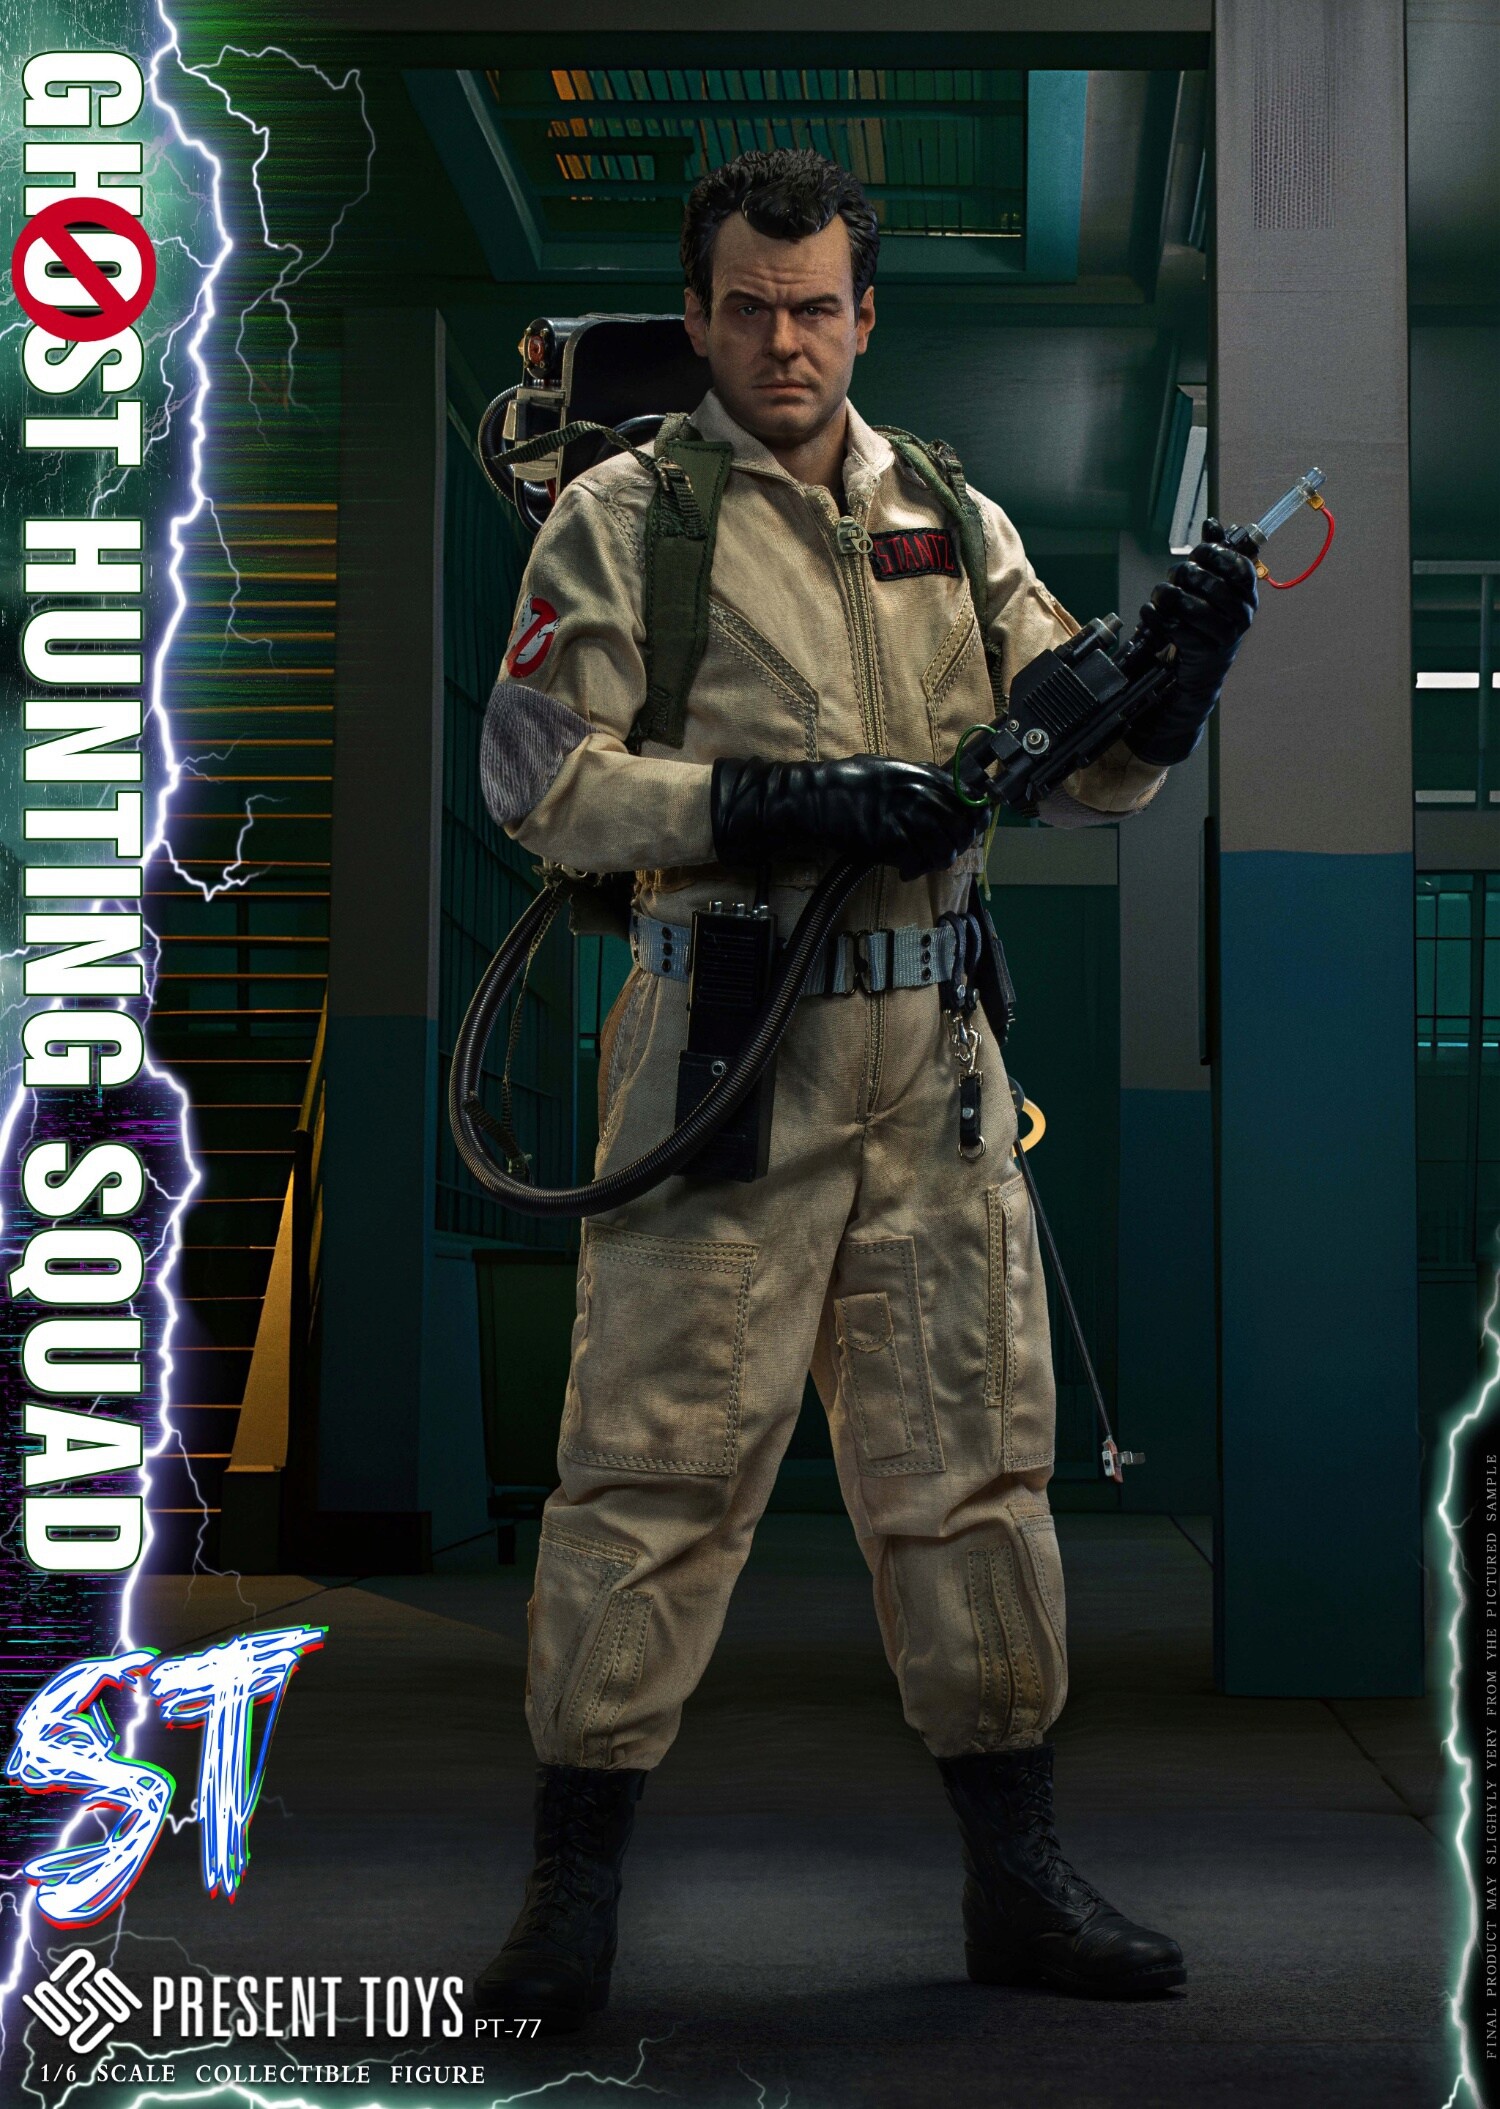 PRESENTTOYS - NEW PRODUCT: PRESENT TOYS - Ghostbusters-ST Agent & SP Agent Collection #PT-sp77/PT-sp78 02184